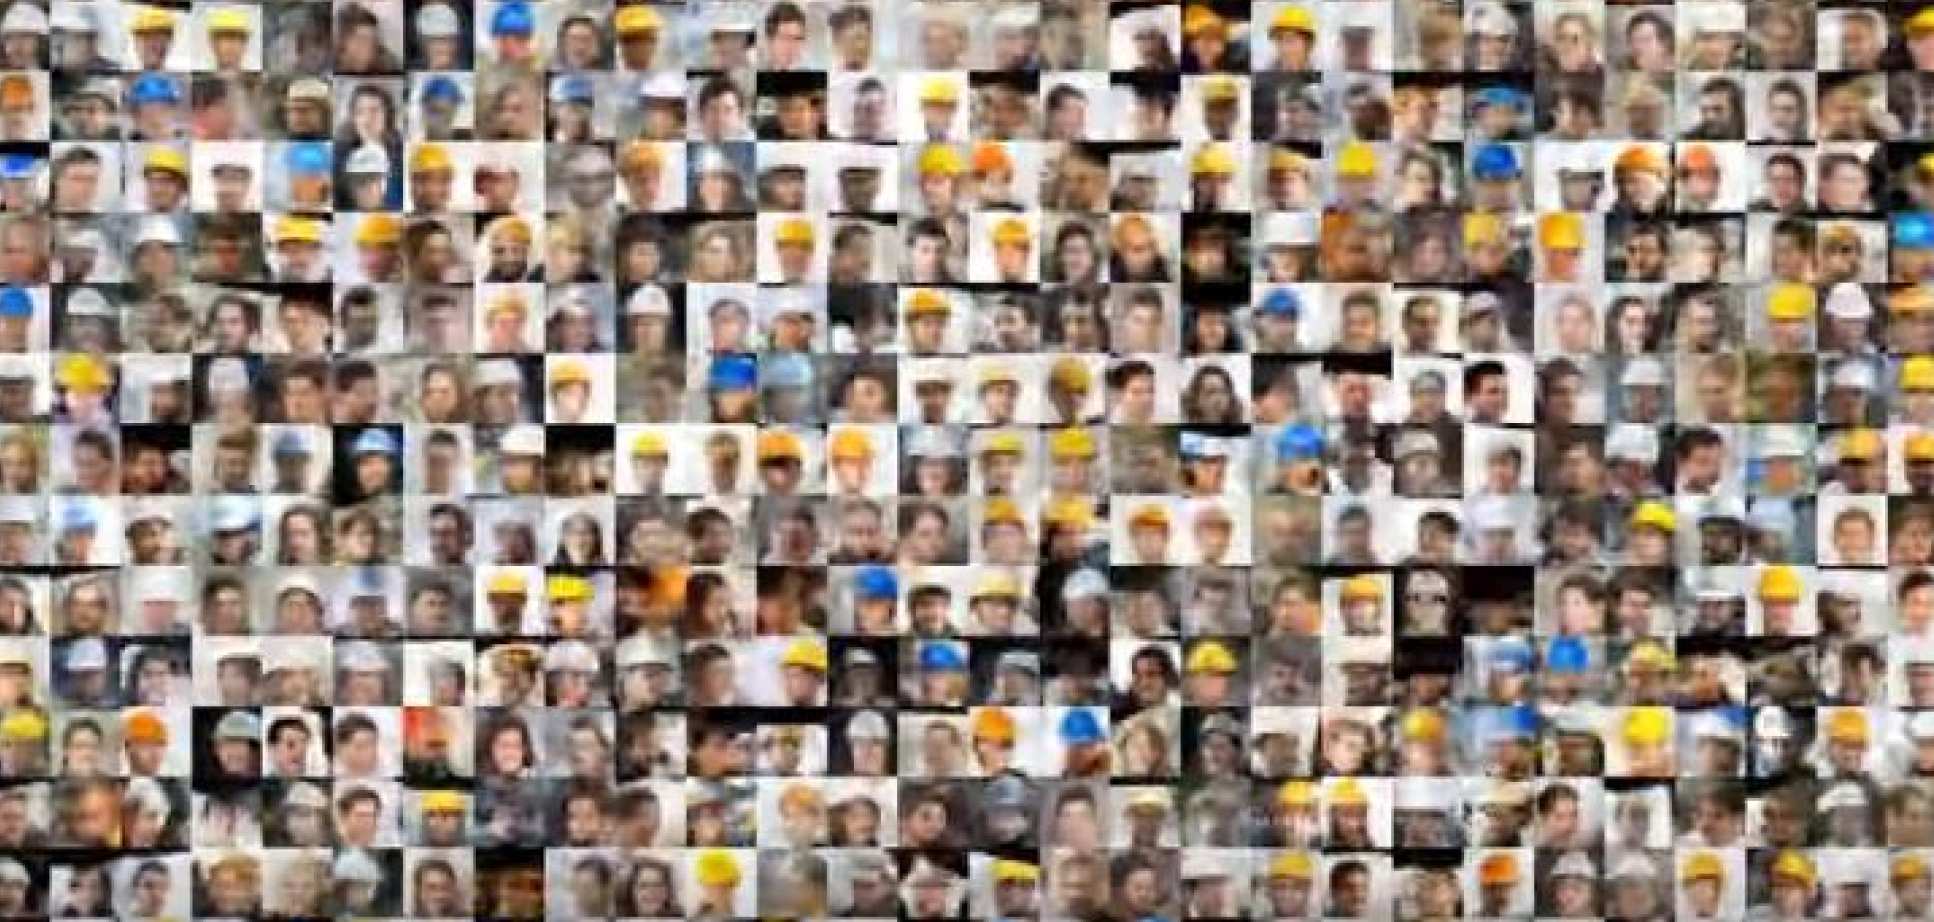 Picture of many tiny photos depicting the average engineer according to search engines. Many of the faces are white and have hard hats.